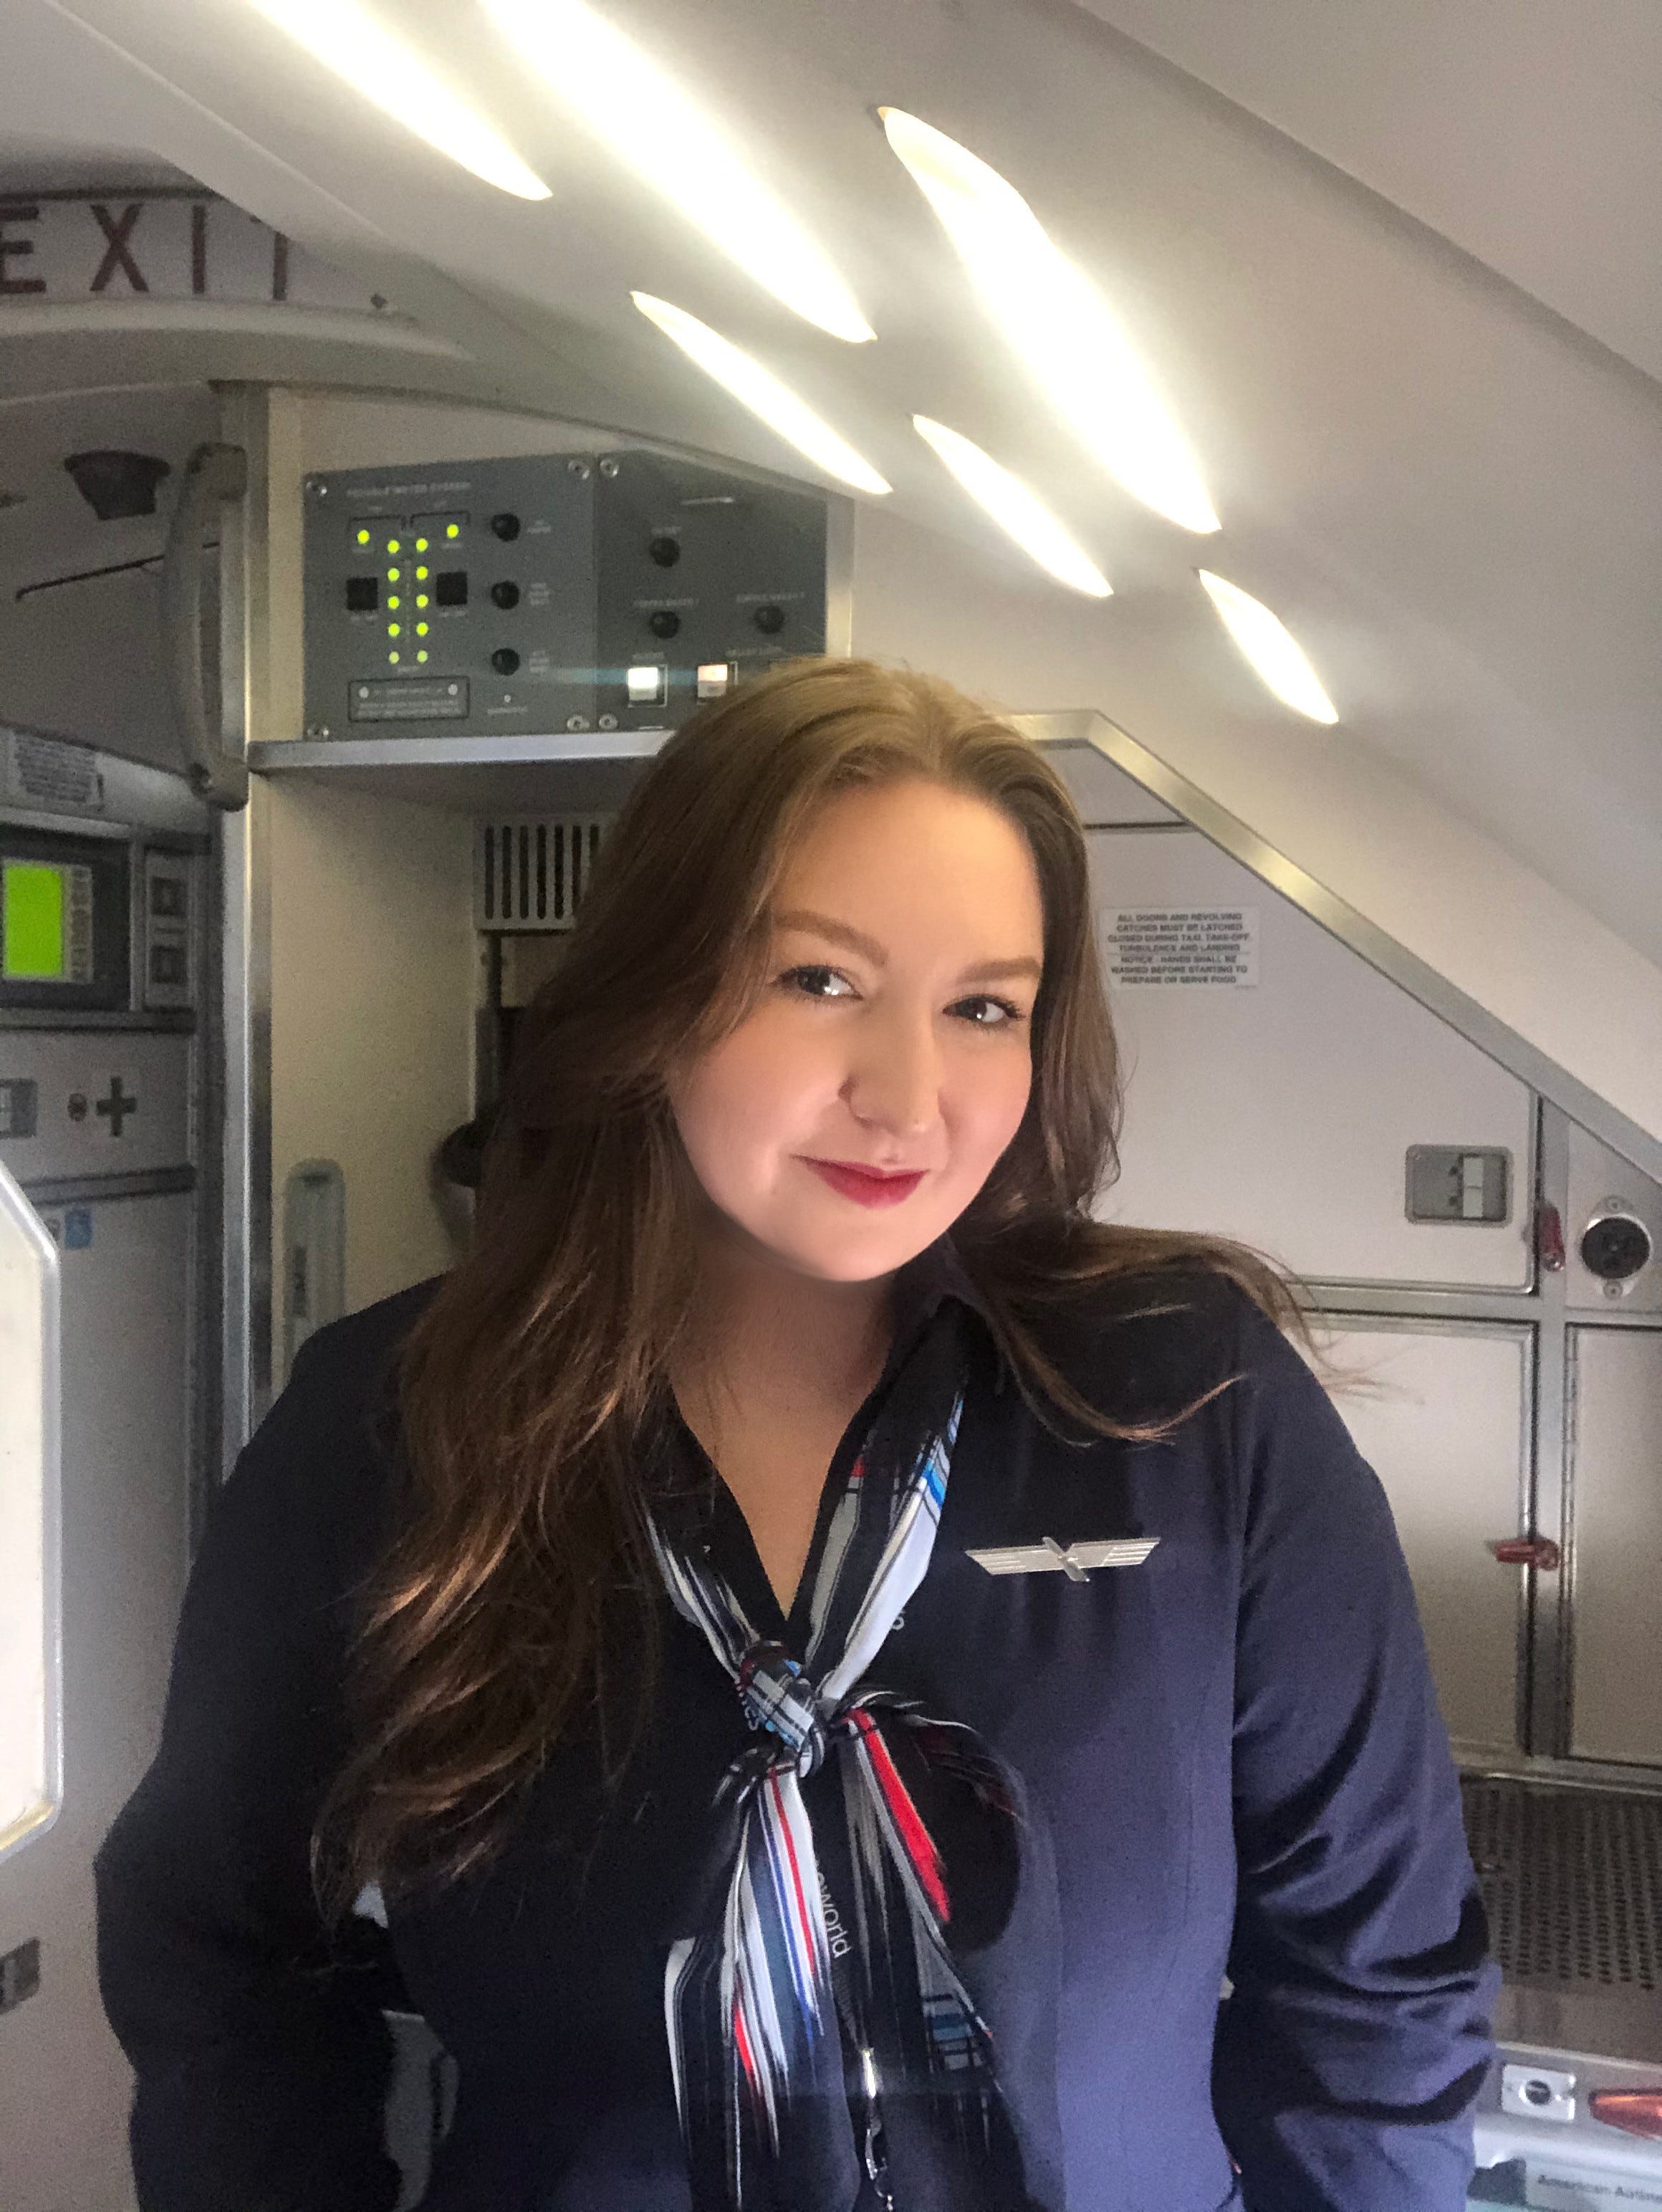 Jayme Johns, a PSA flight attendant, said schedule cutbacks kept her from securing a regular service route and she expects to lose her job.